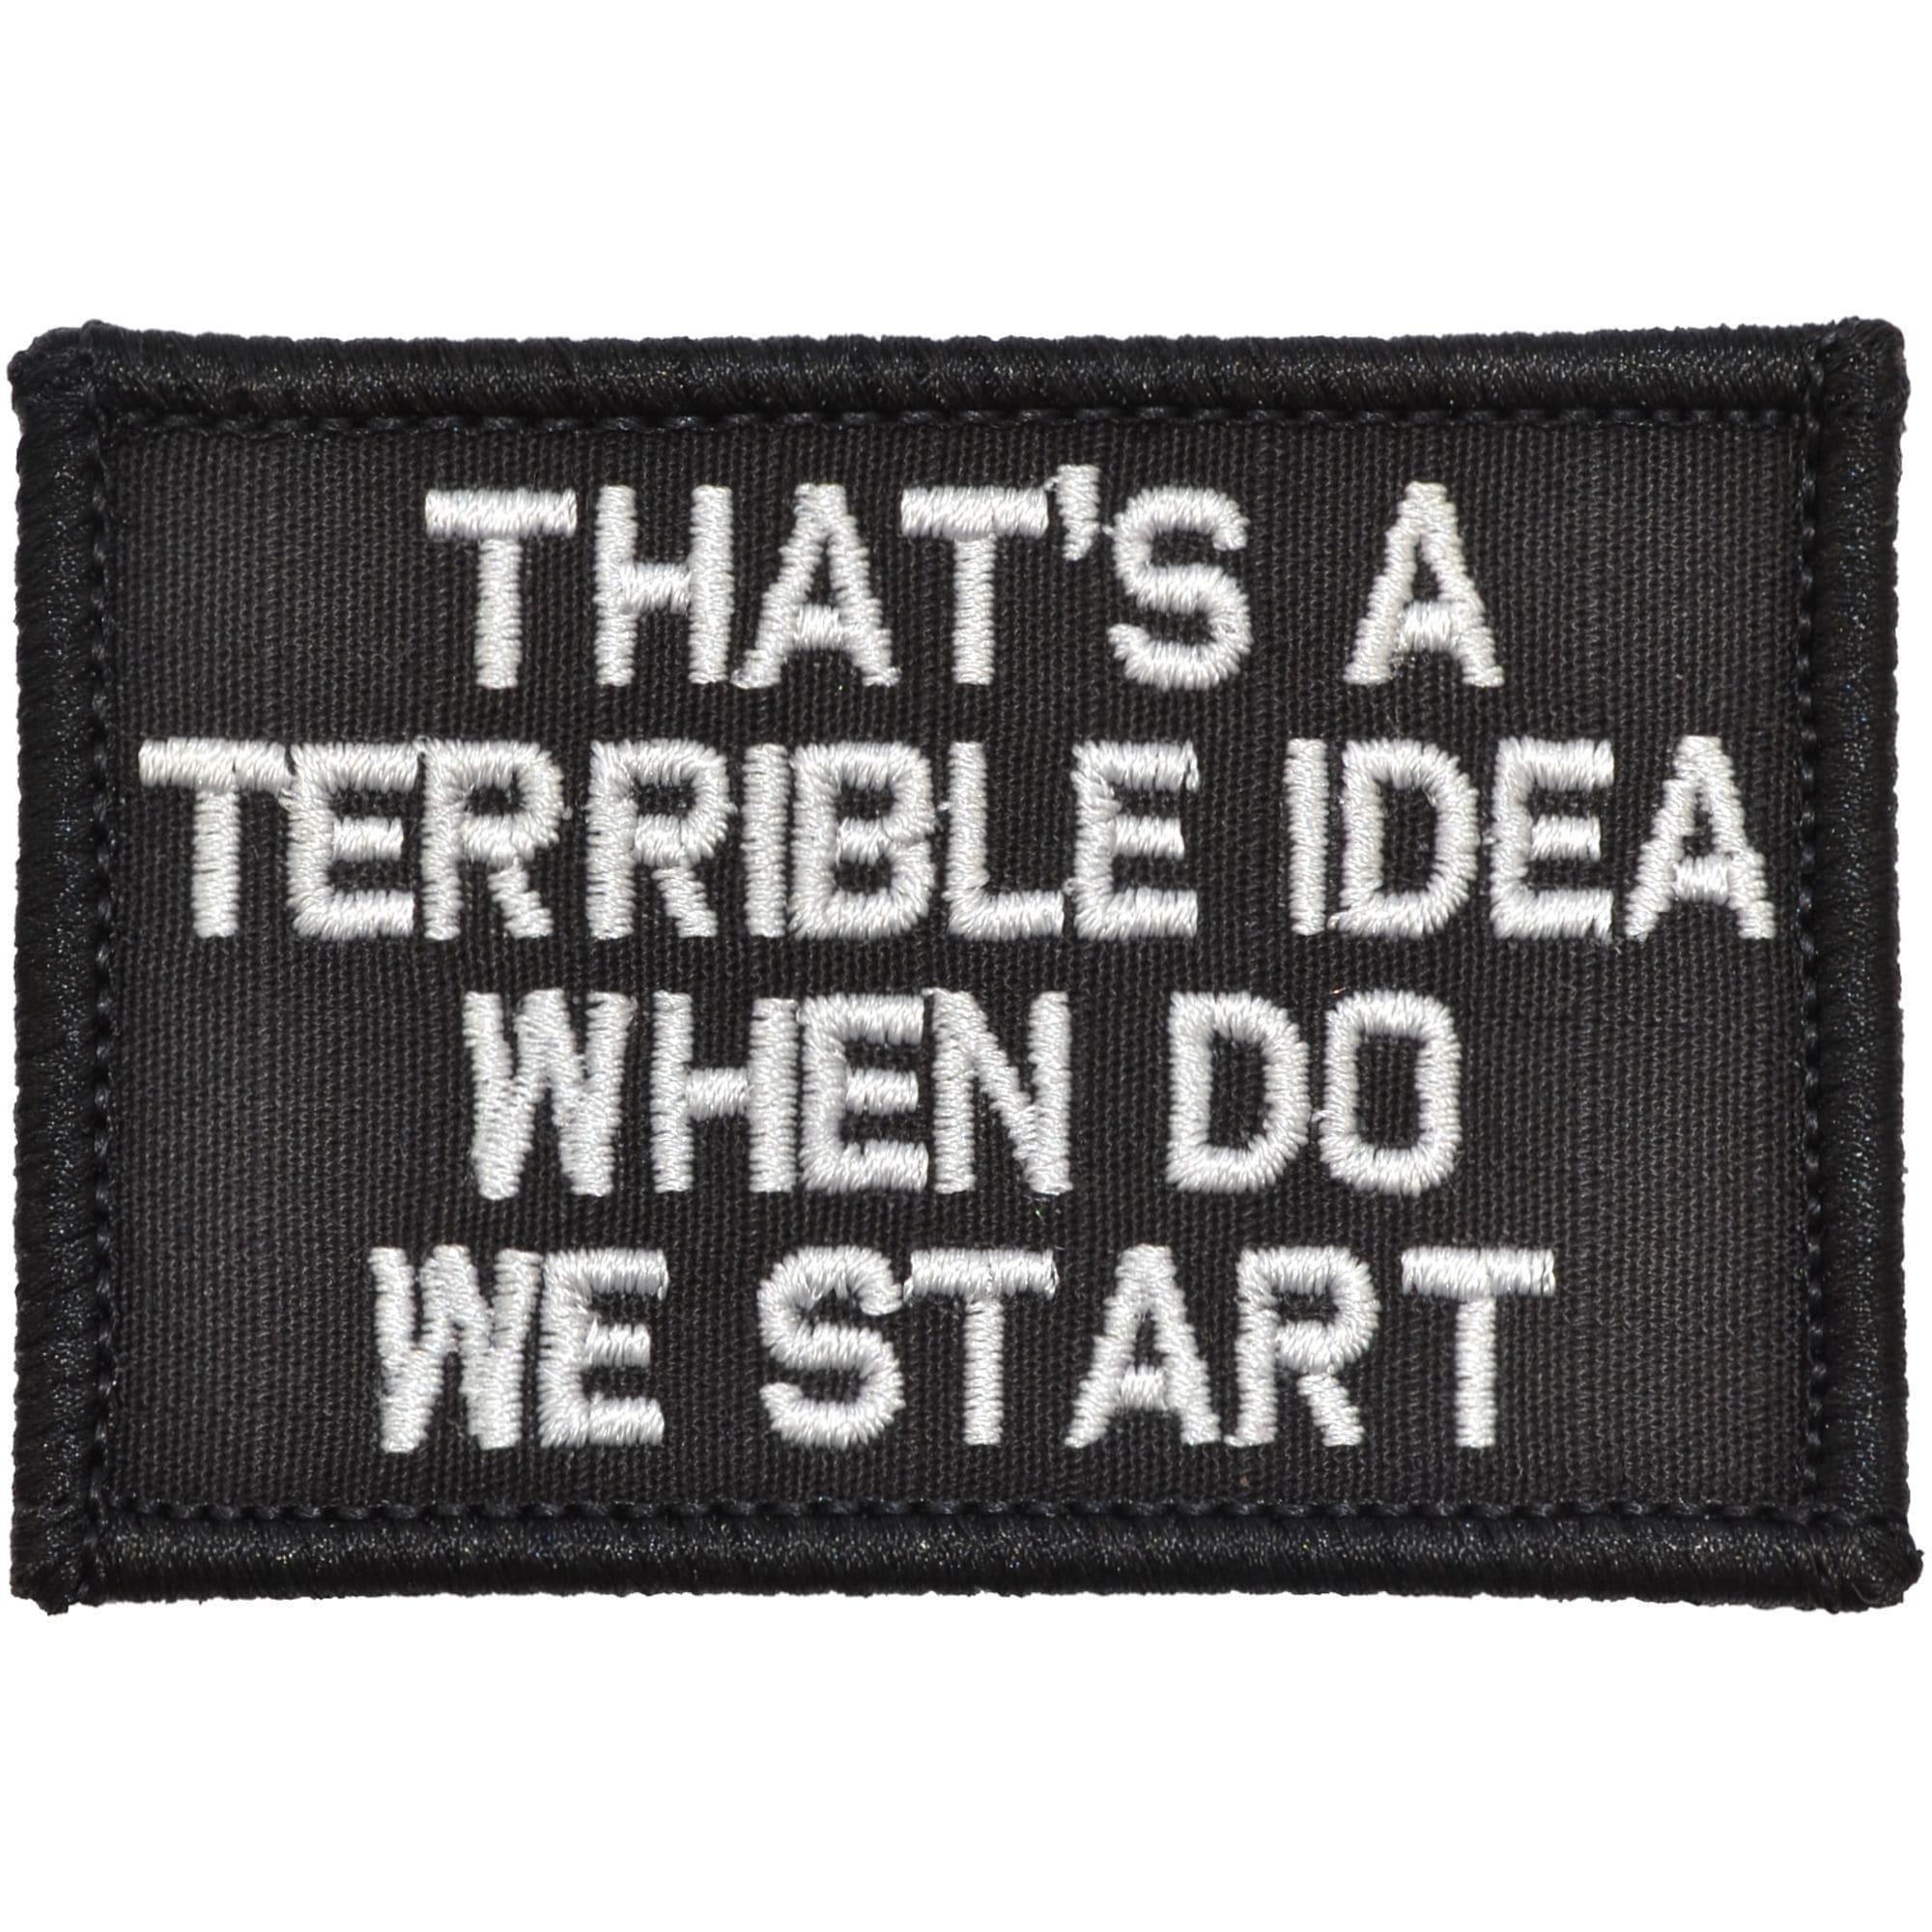 Tactical Gear Junkie Patches Black That's a Terrible Idea When Do We Start - 2x3 Patch